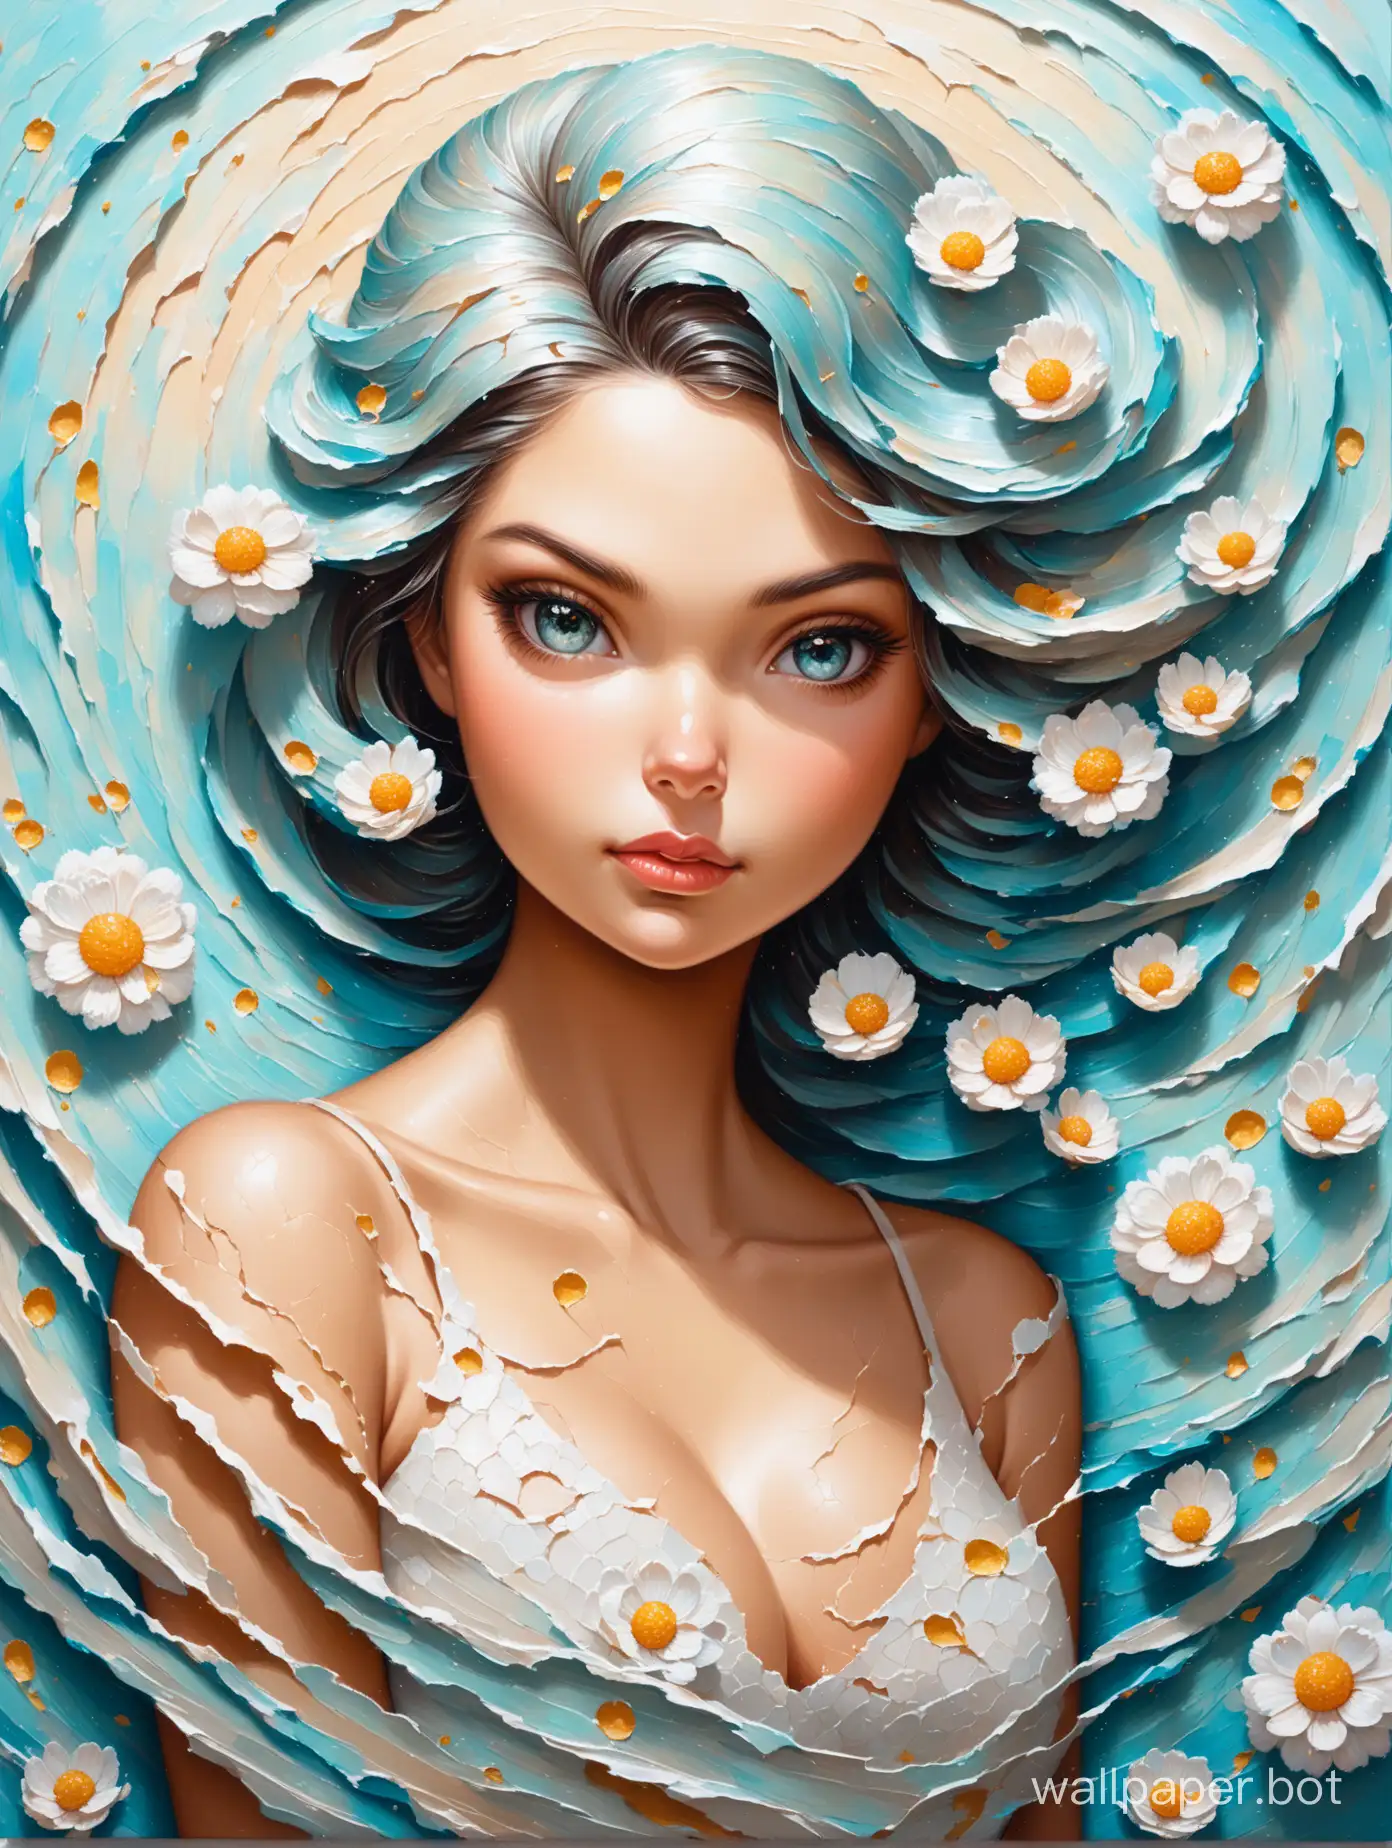 Multi-layered textured oil painting Impasto, ( elegant, extremely cute girl, in the style of Raoul Guerra, swirling double composition, voluminous small flowers), cinematic, hyper-realistic, sharp focus, very detailed, with cracked, flaking impasto in places, surreal, super detailed, clear illustration.